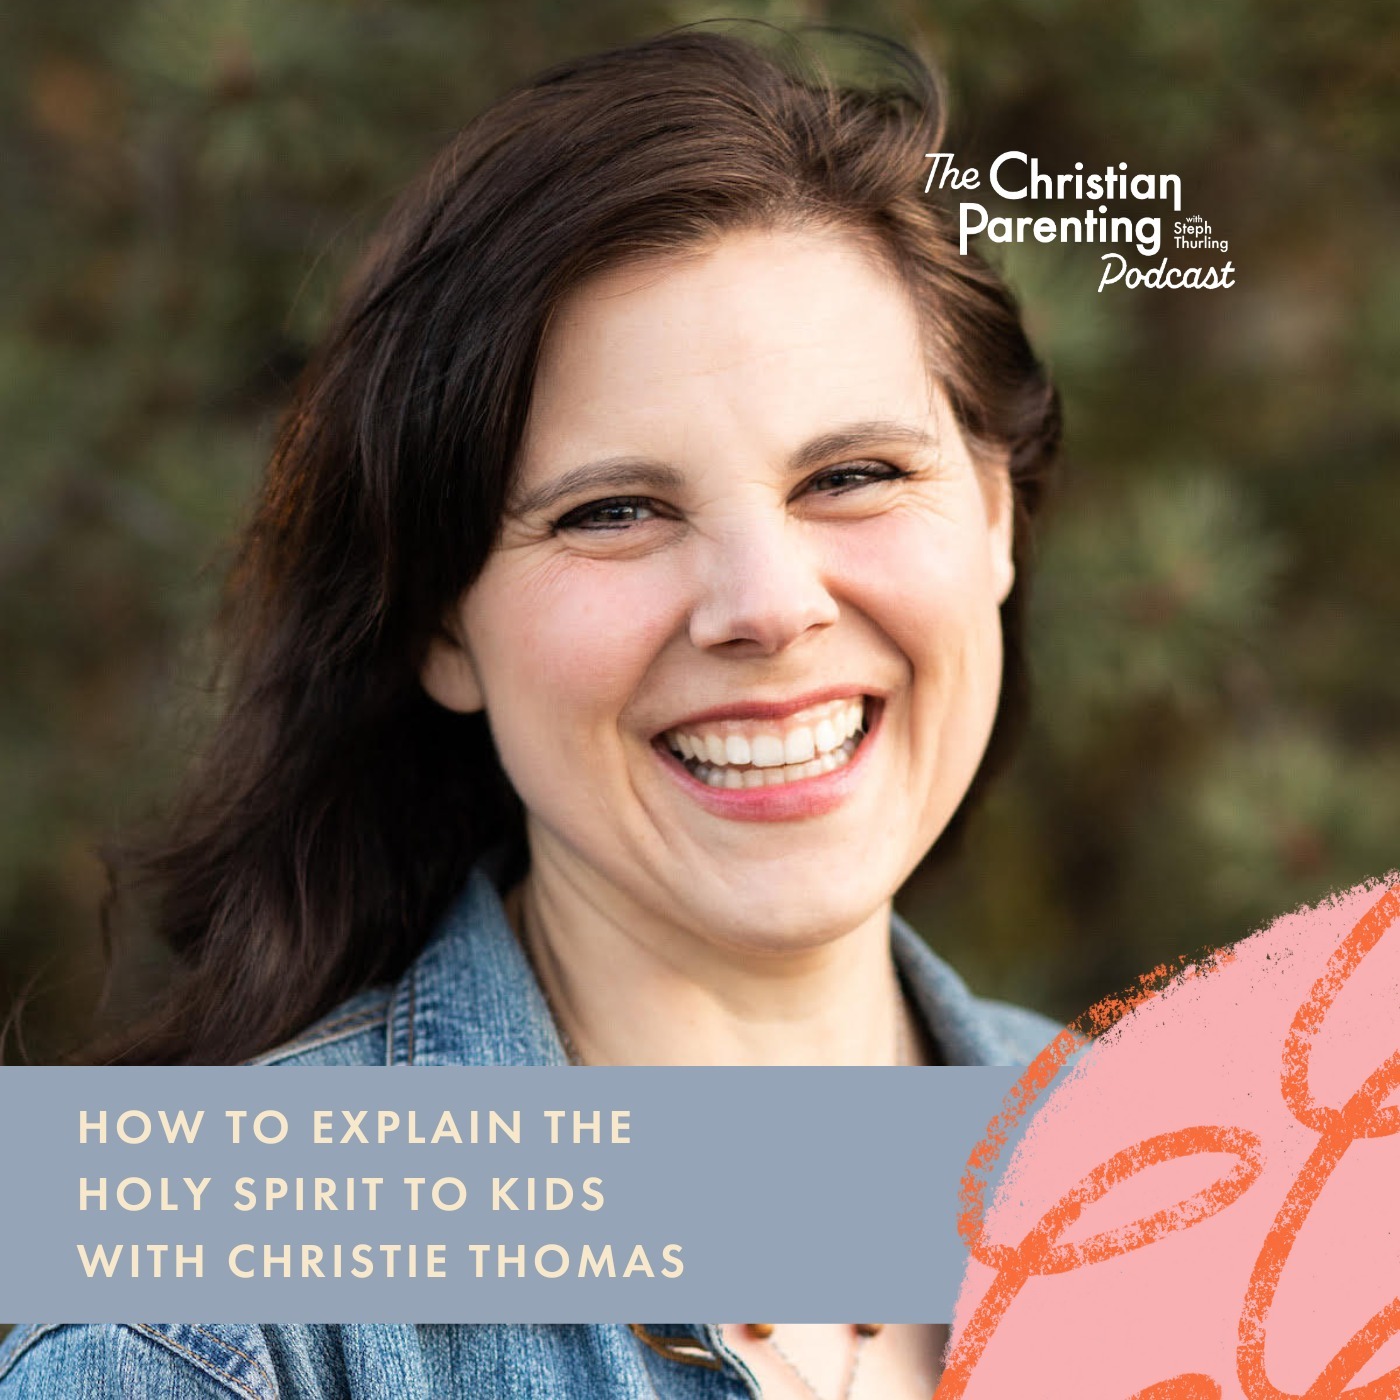 How to explain the Holy Spirit to kids with Christie Thomas